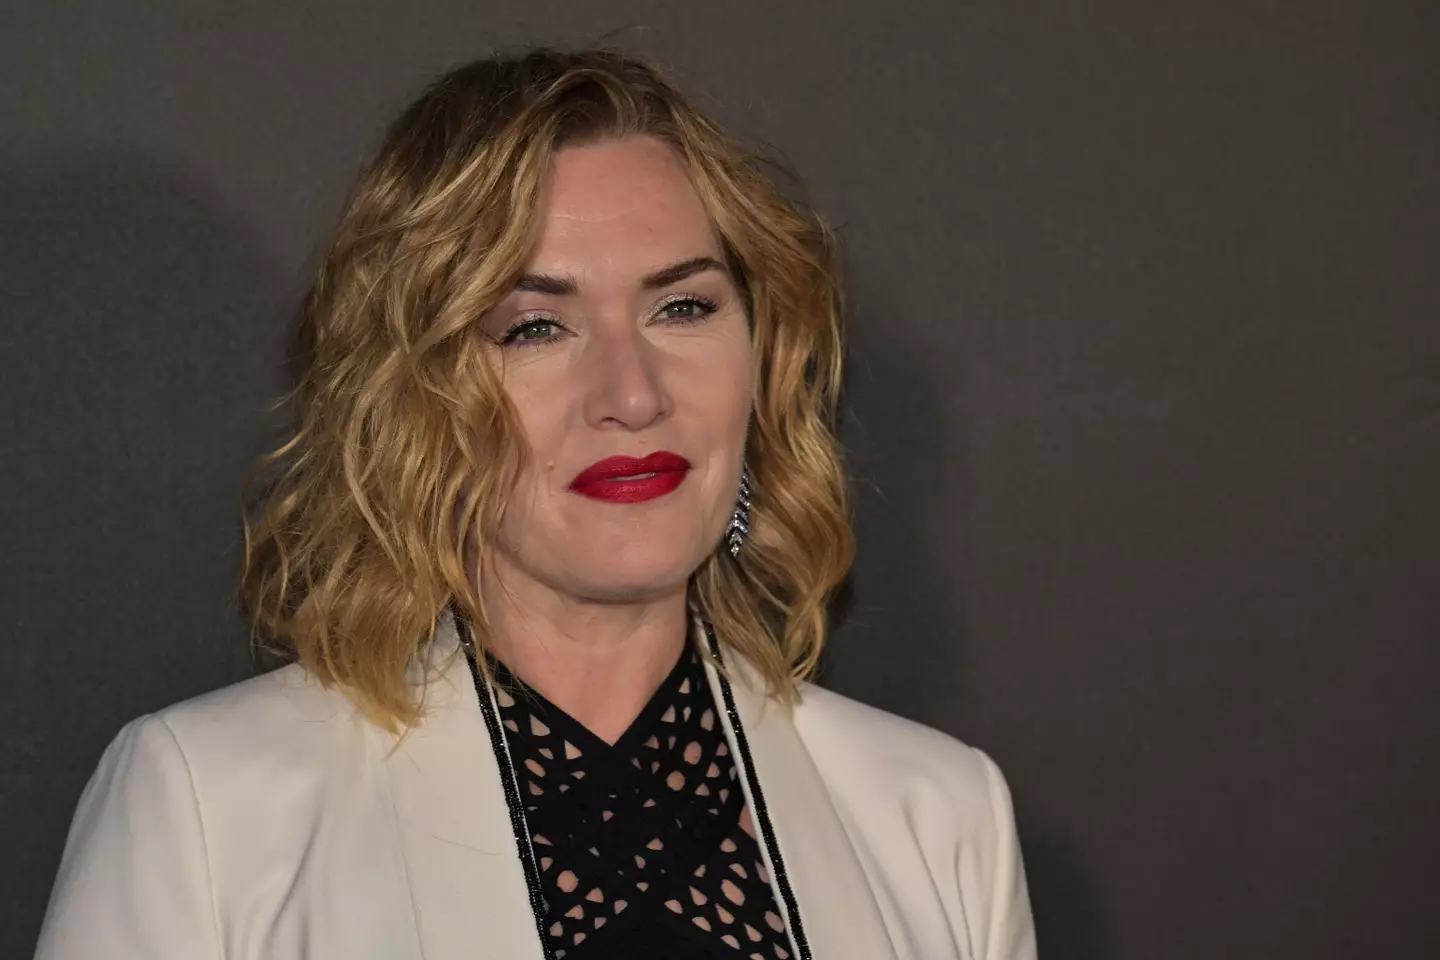 Winslet wished she hadn't 'shown so much flesh' in the scene.